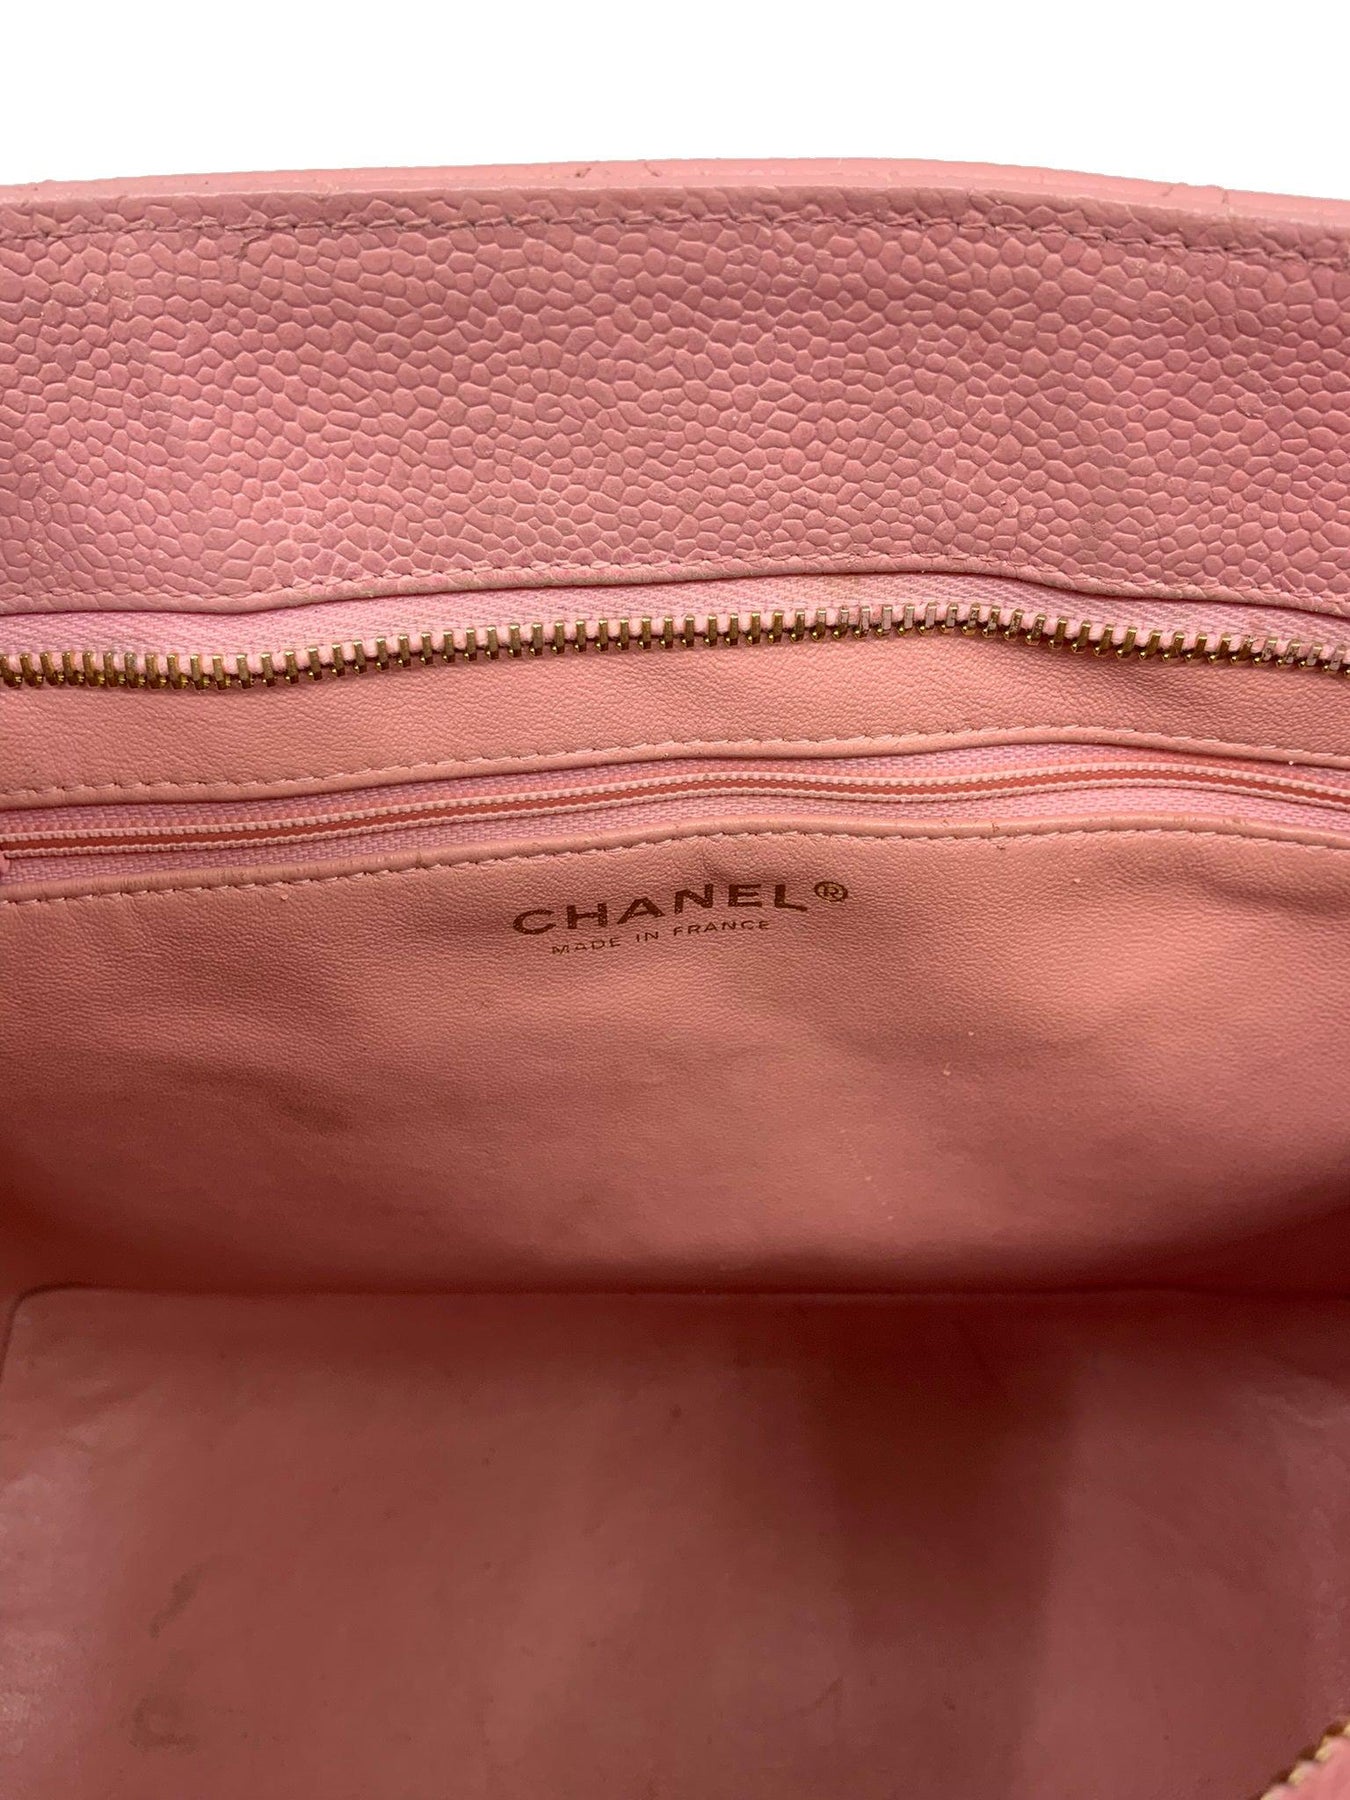 Chanel Quilted Caviar Medallion Tote Bag